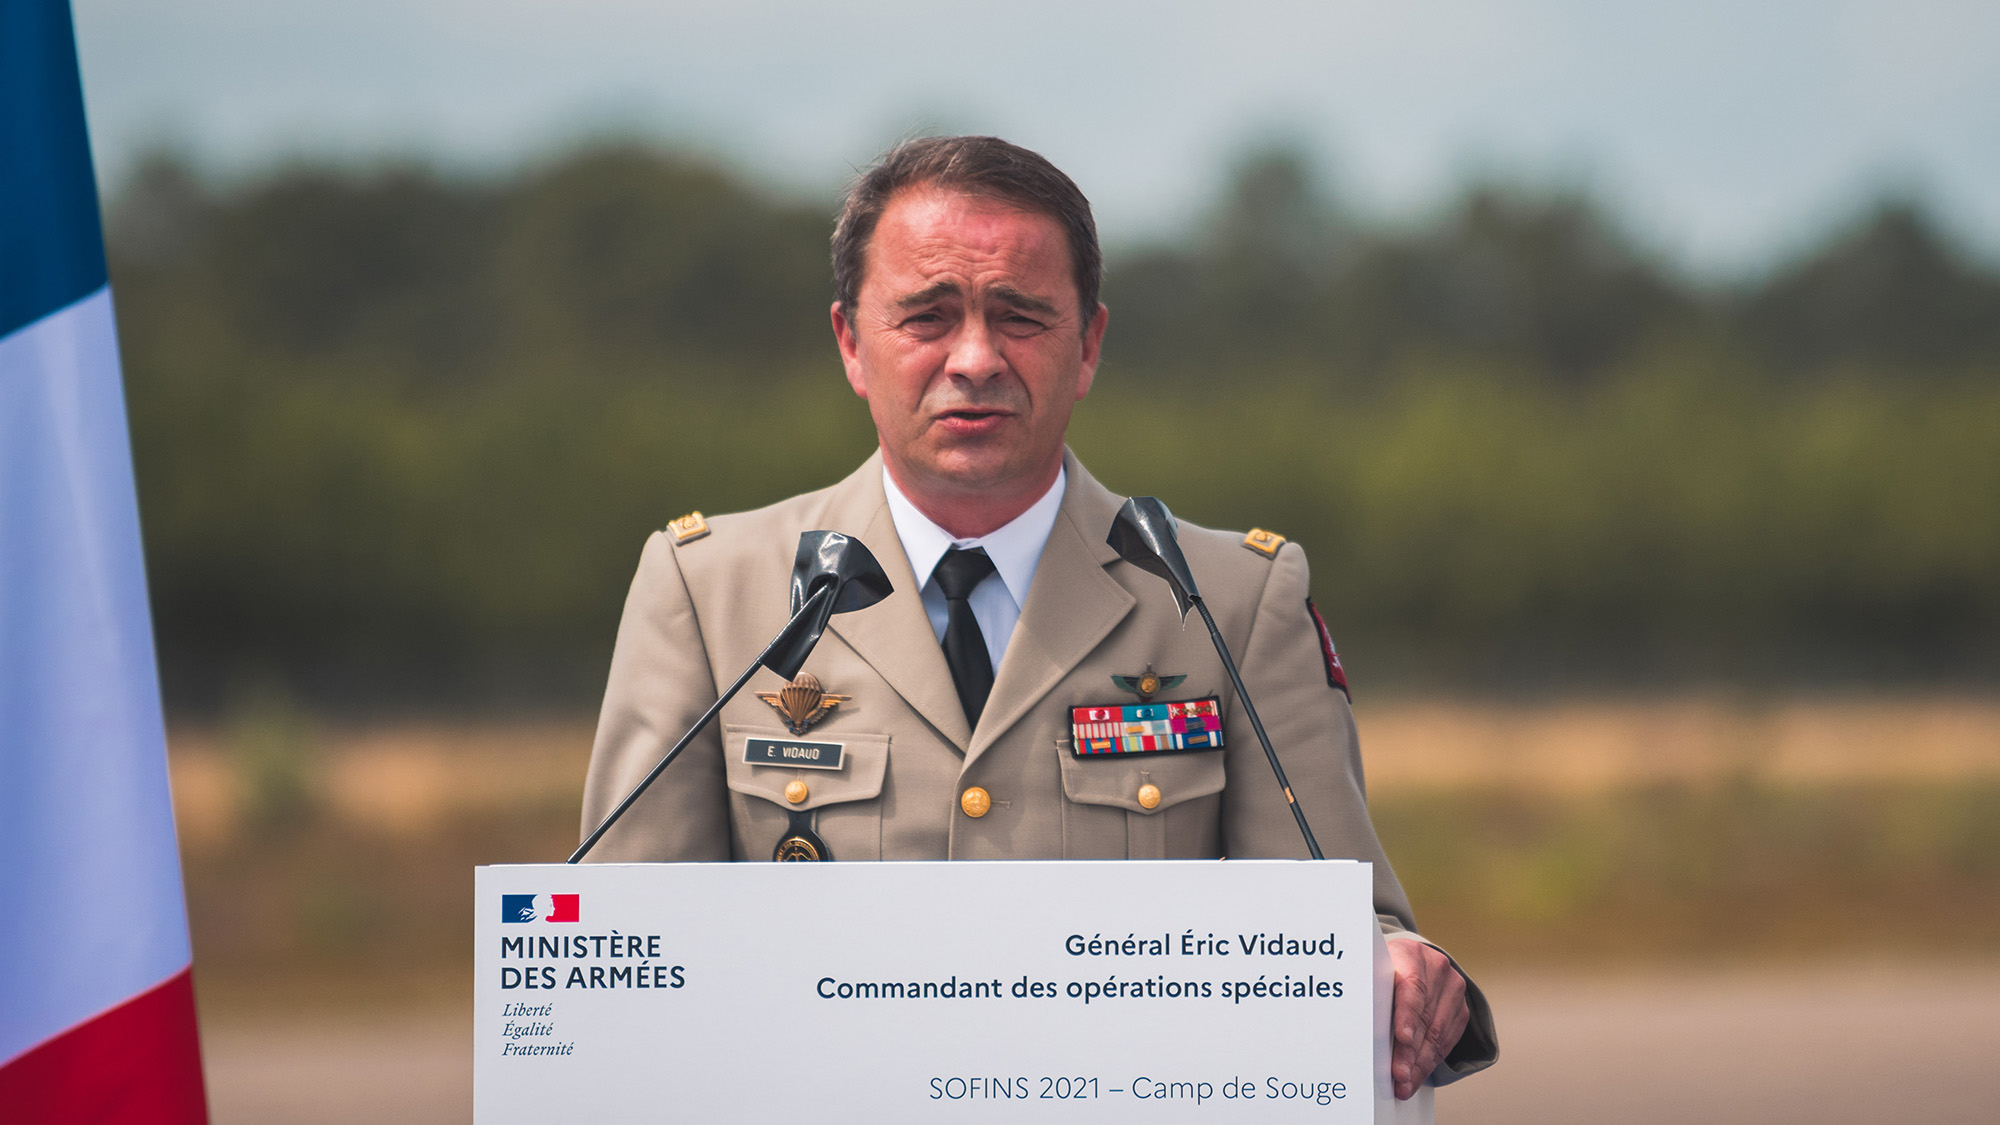 Chief of French military intelligence, Gen. Eric Vidaud is seen speaking during a special operations seminar in southwestern France on July 1, 2021. 